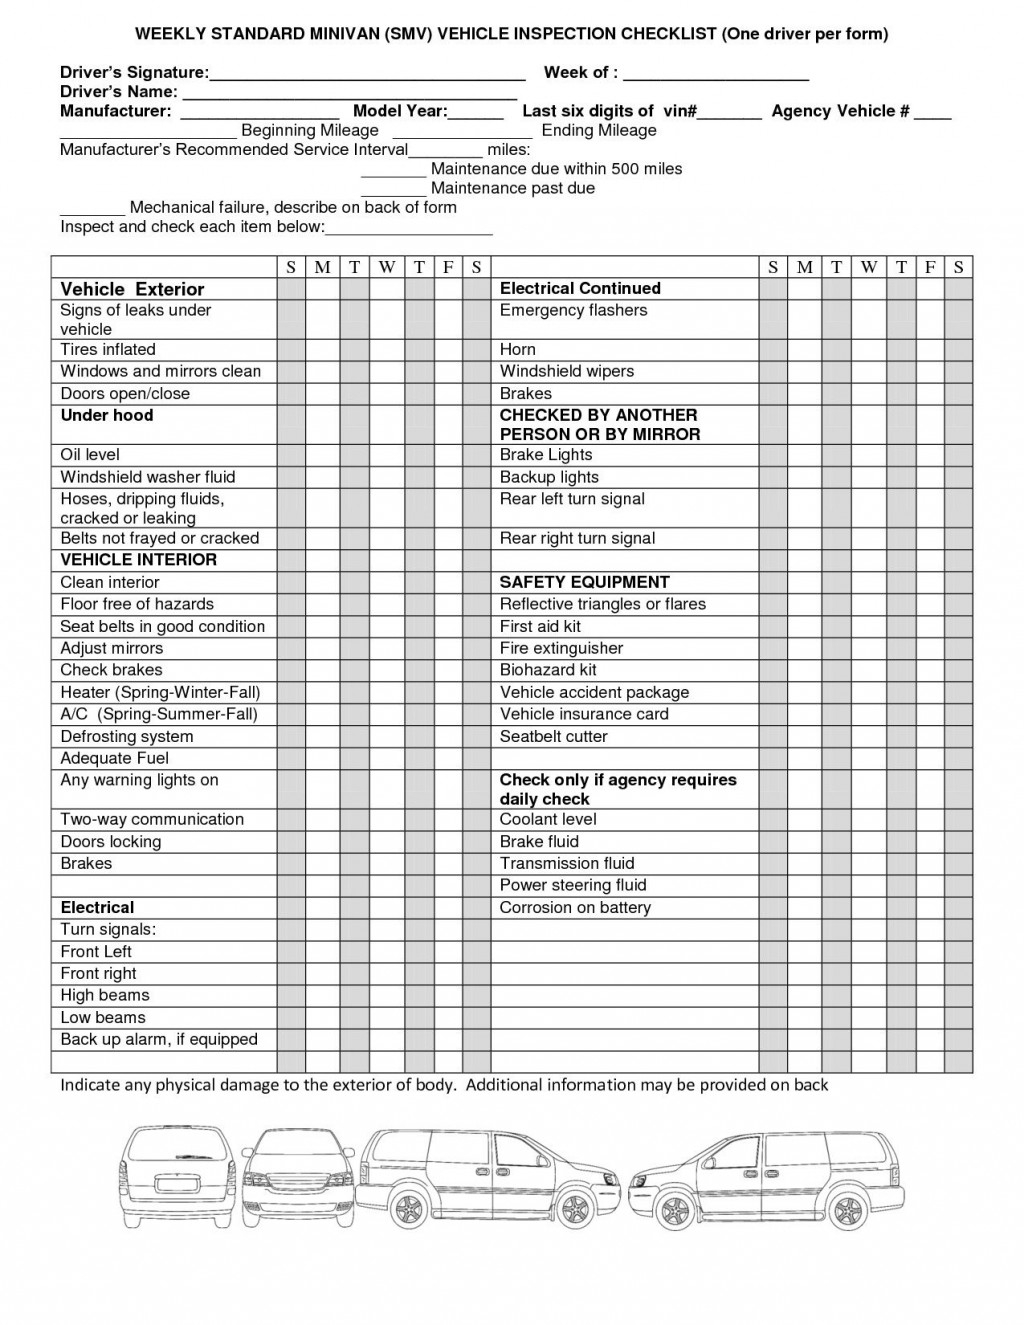 Printable Mto Vehicle Safety Inspection Checklist : Safety  Throughout Daily Vehicle Maintenance Checklist Template Within Daily Vehicle Maintenance Checklist Template